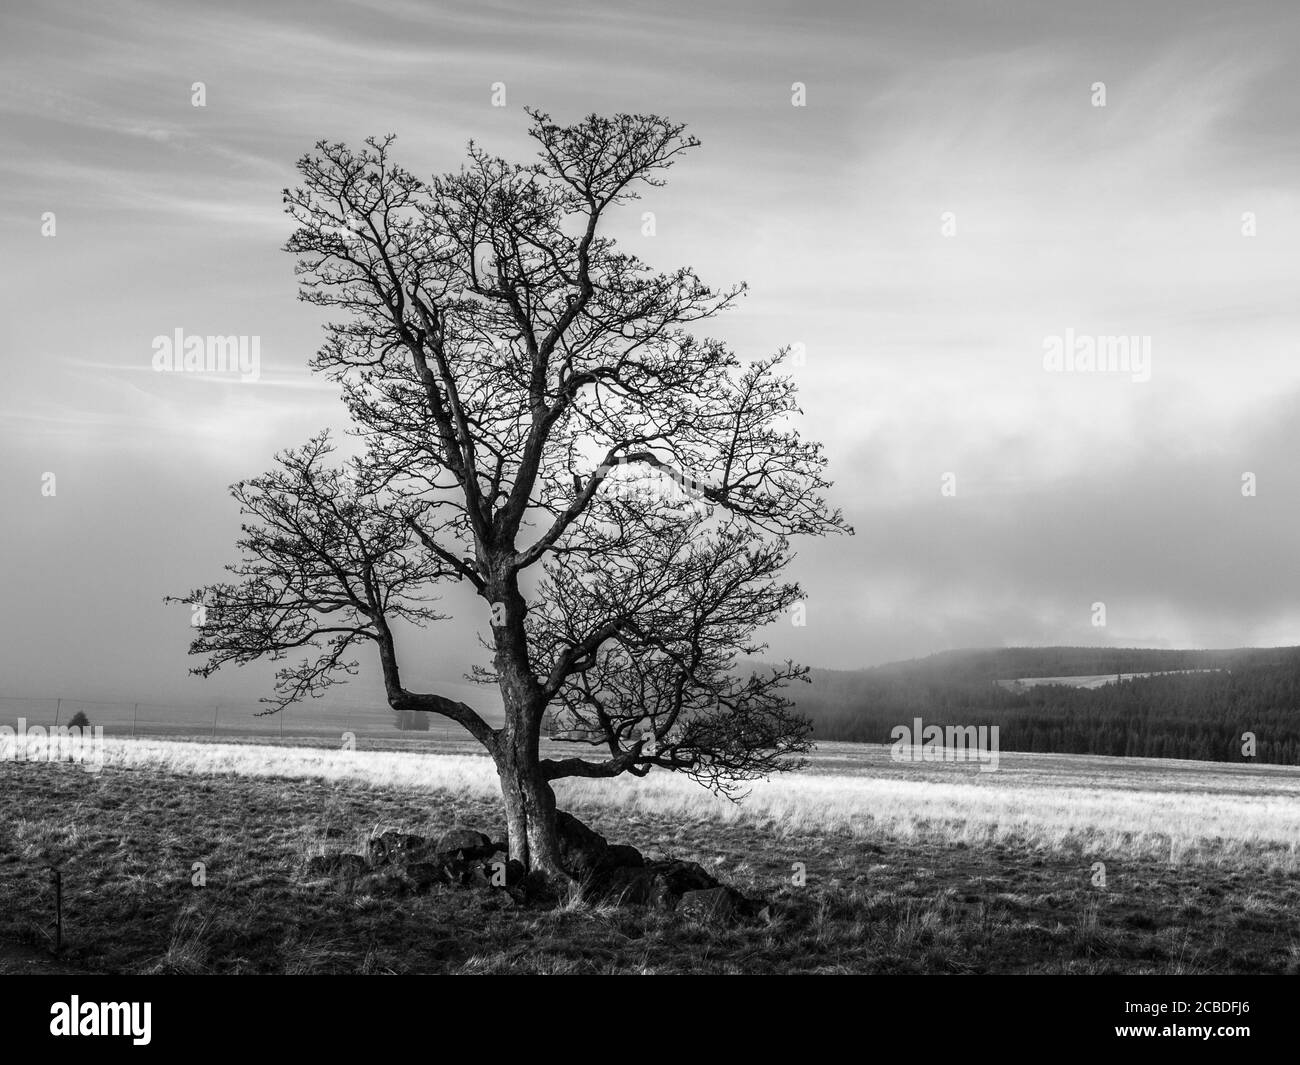 Solitary tree in autumn foggy landscape in black and white Stock Photo